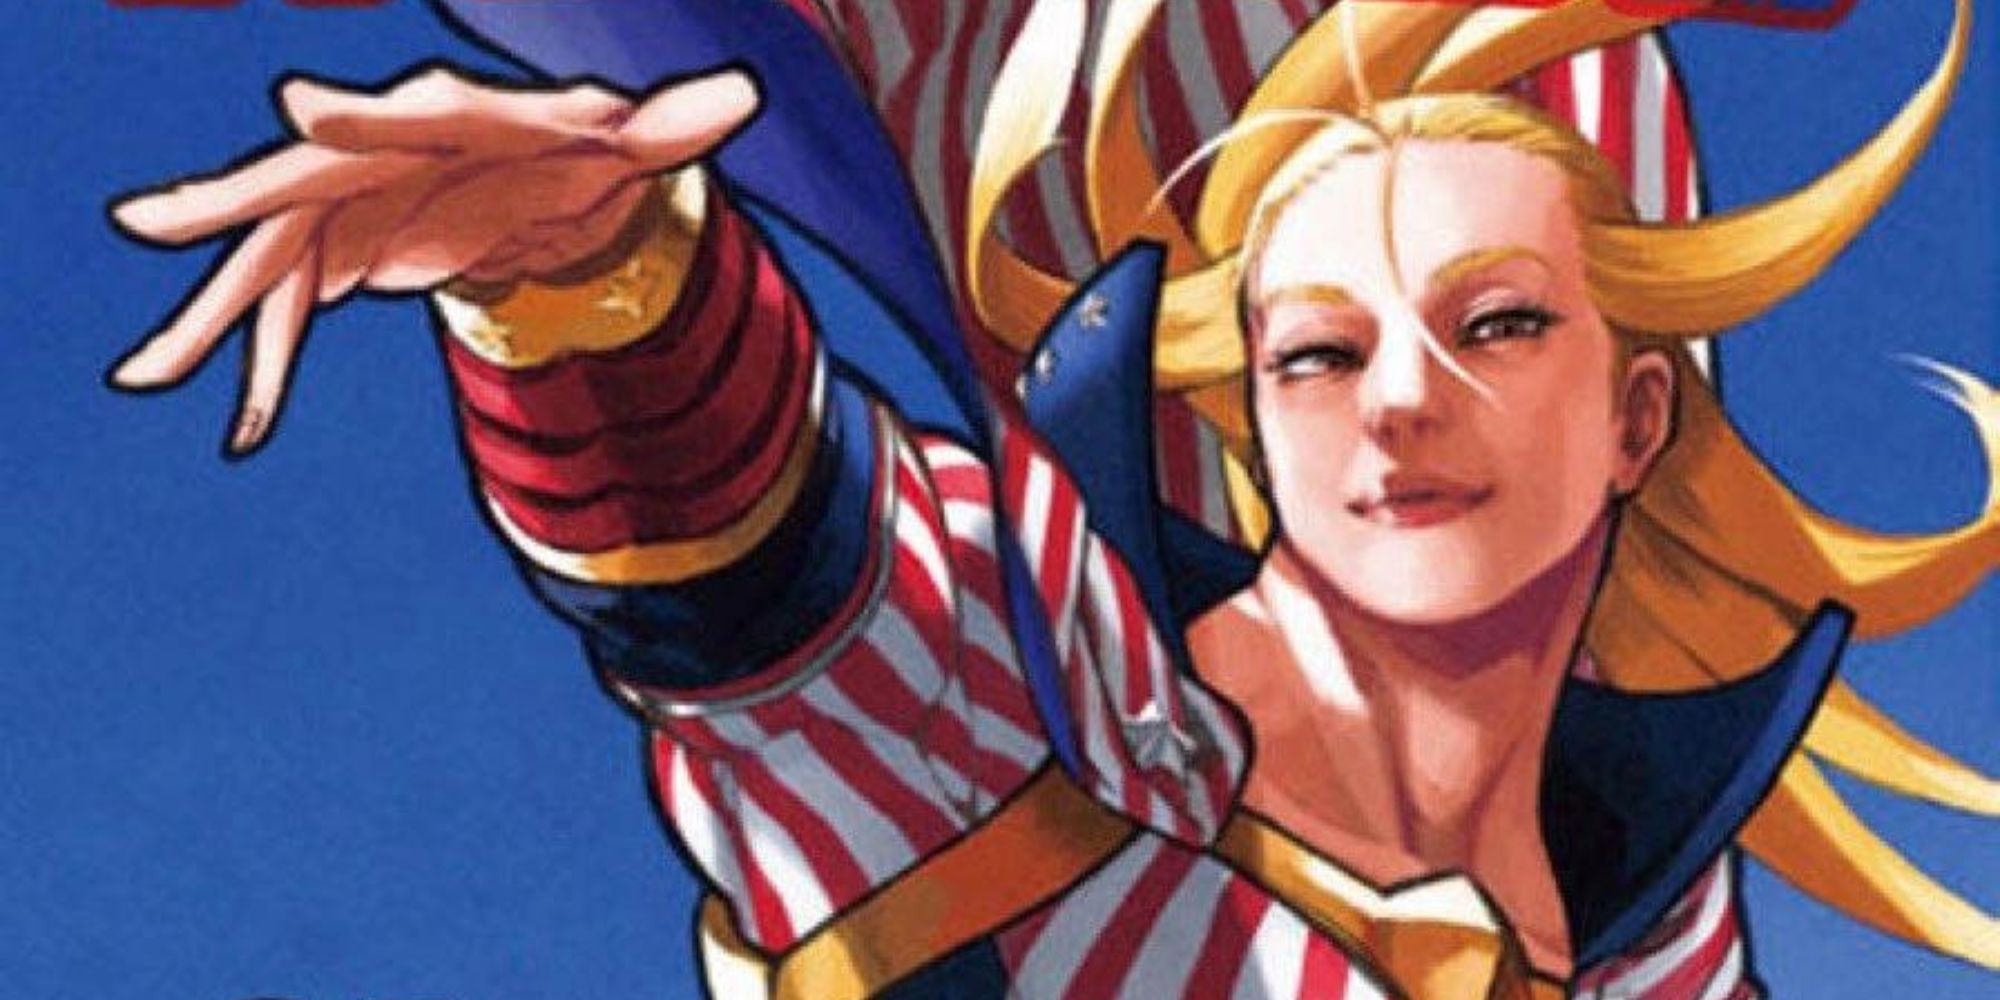 manga art of a muscular blonde woman wearing a superhero costume covered in the american flag